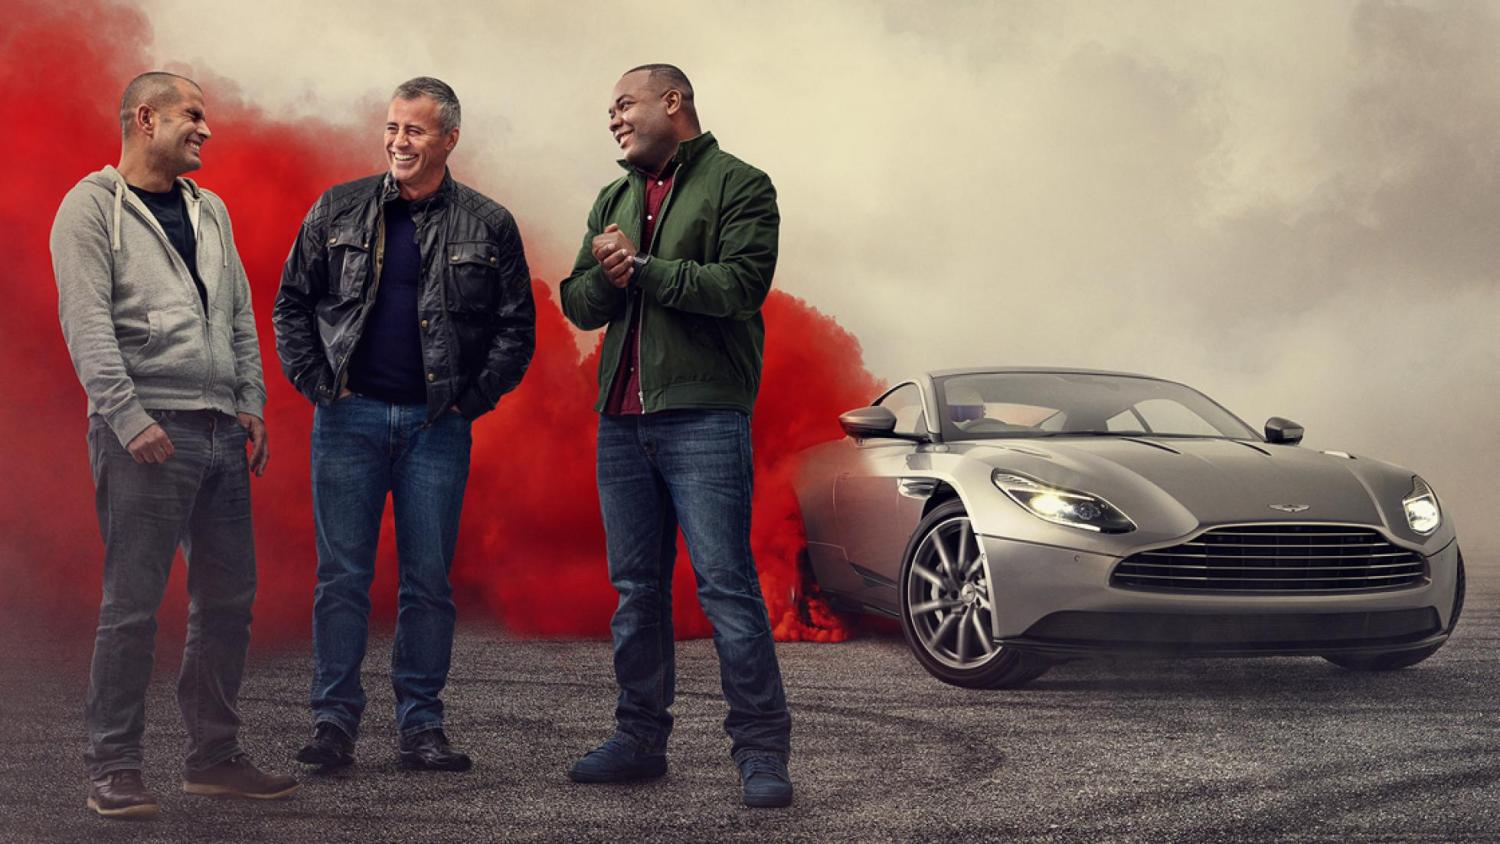 Rory Reid On Top Gear, Chris Evans, Clarkson And Arm Wrestling: Exclusive Interview